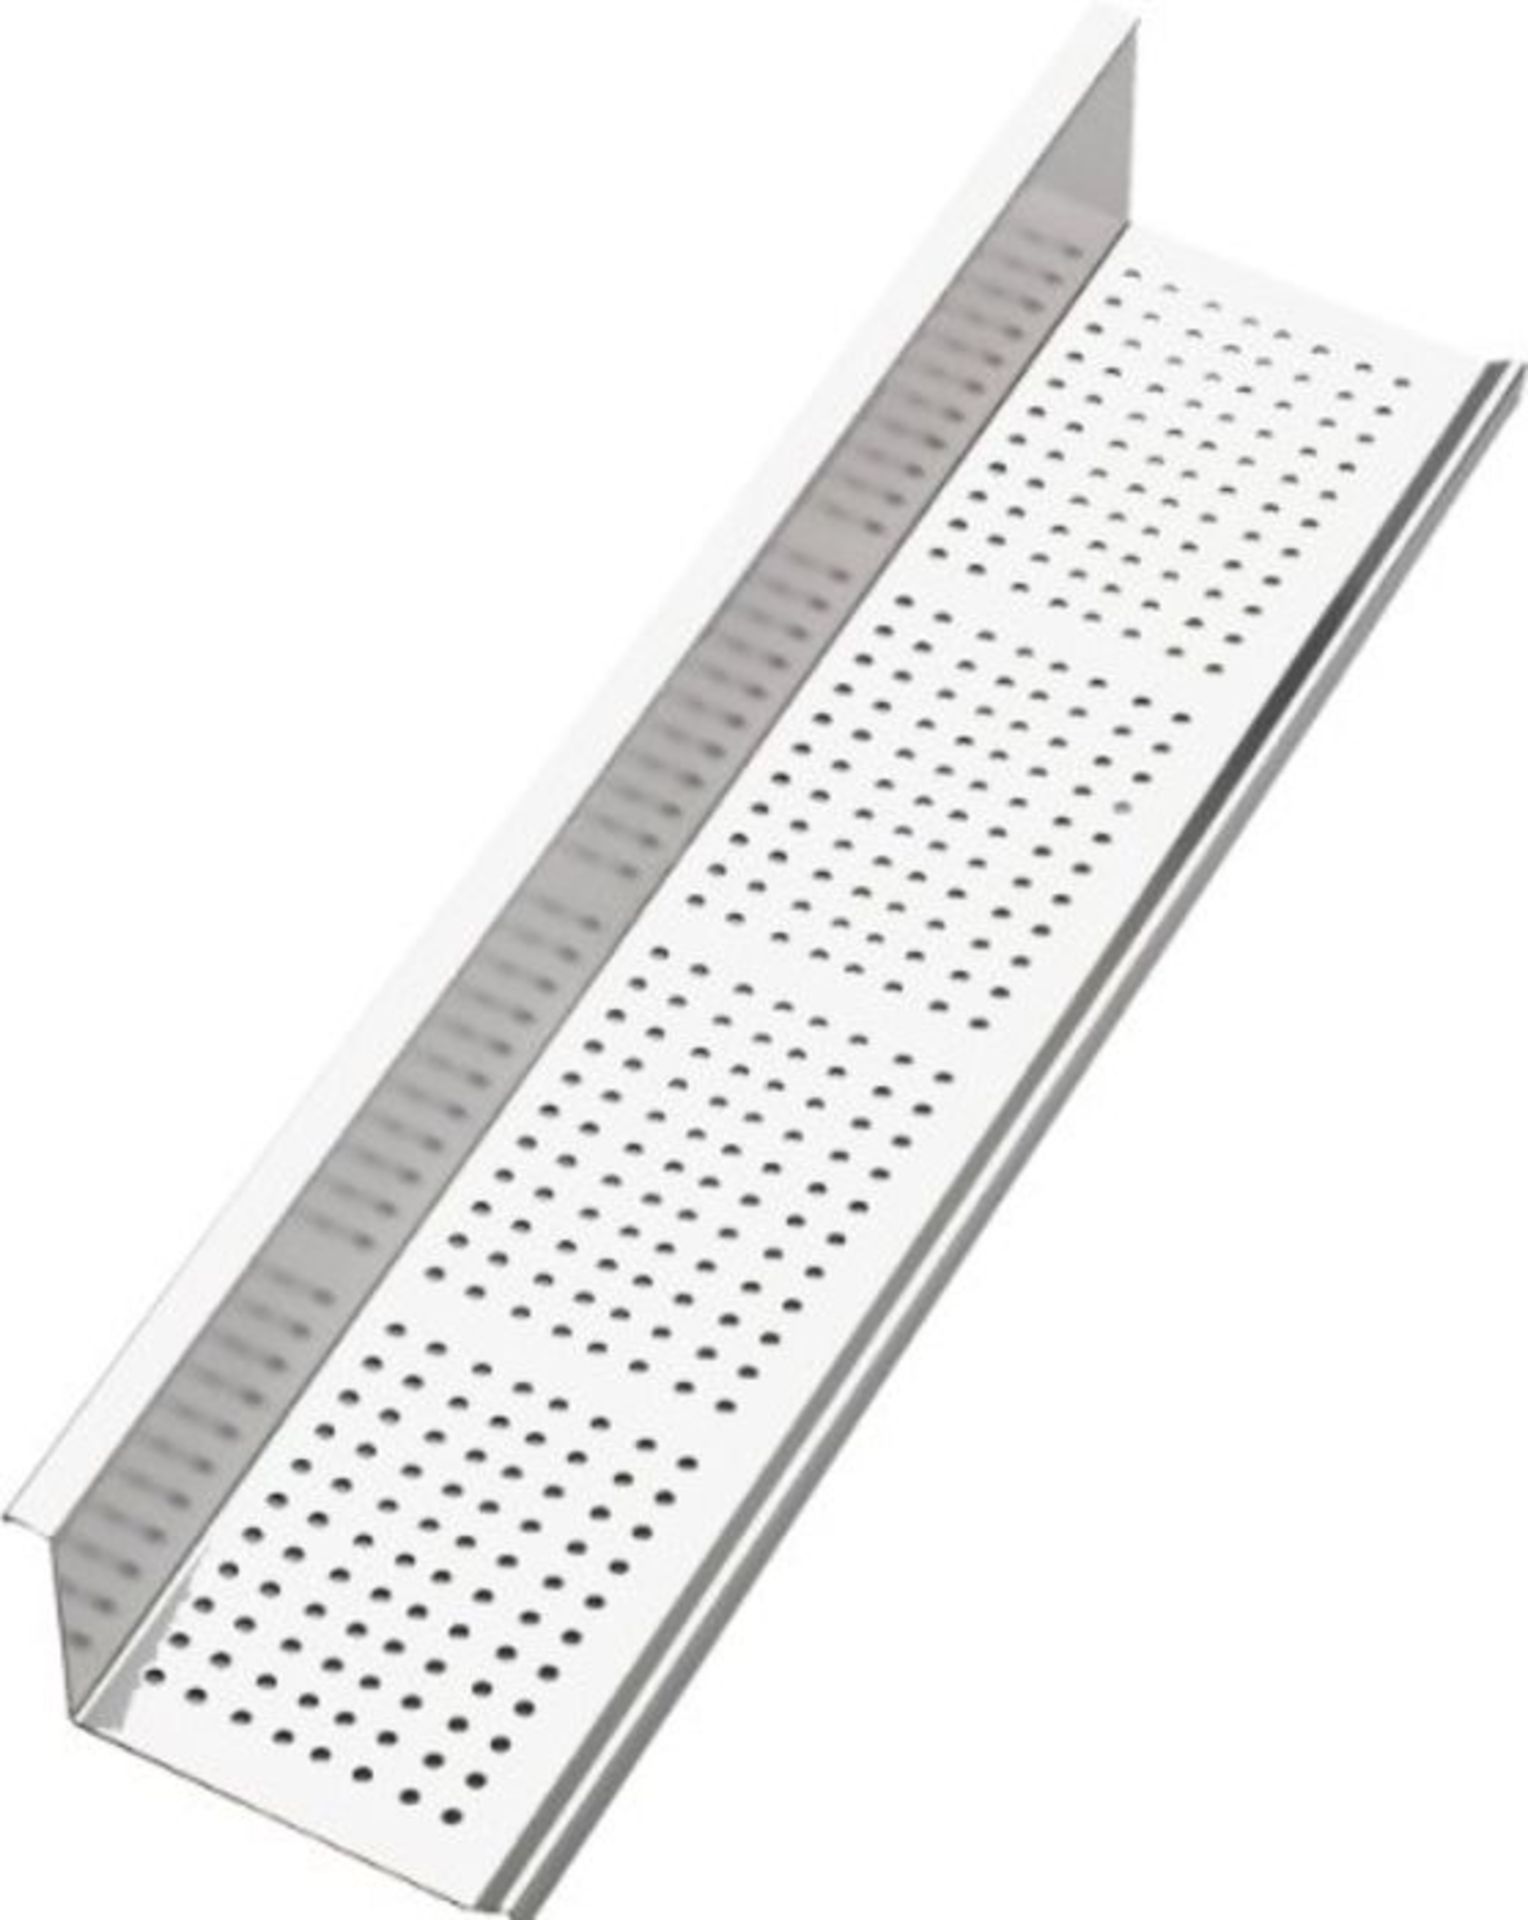 Dancook Universal shelf for 50cm and 62cm wide box Barbecues - (product no. 130 120). - Image 4 of 6